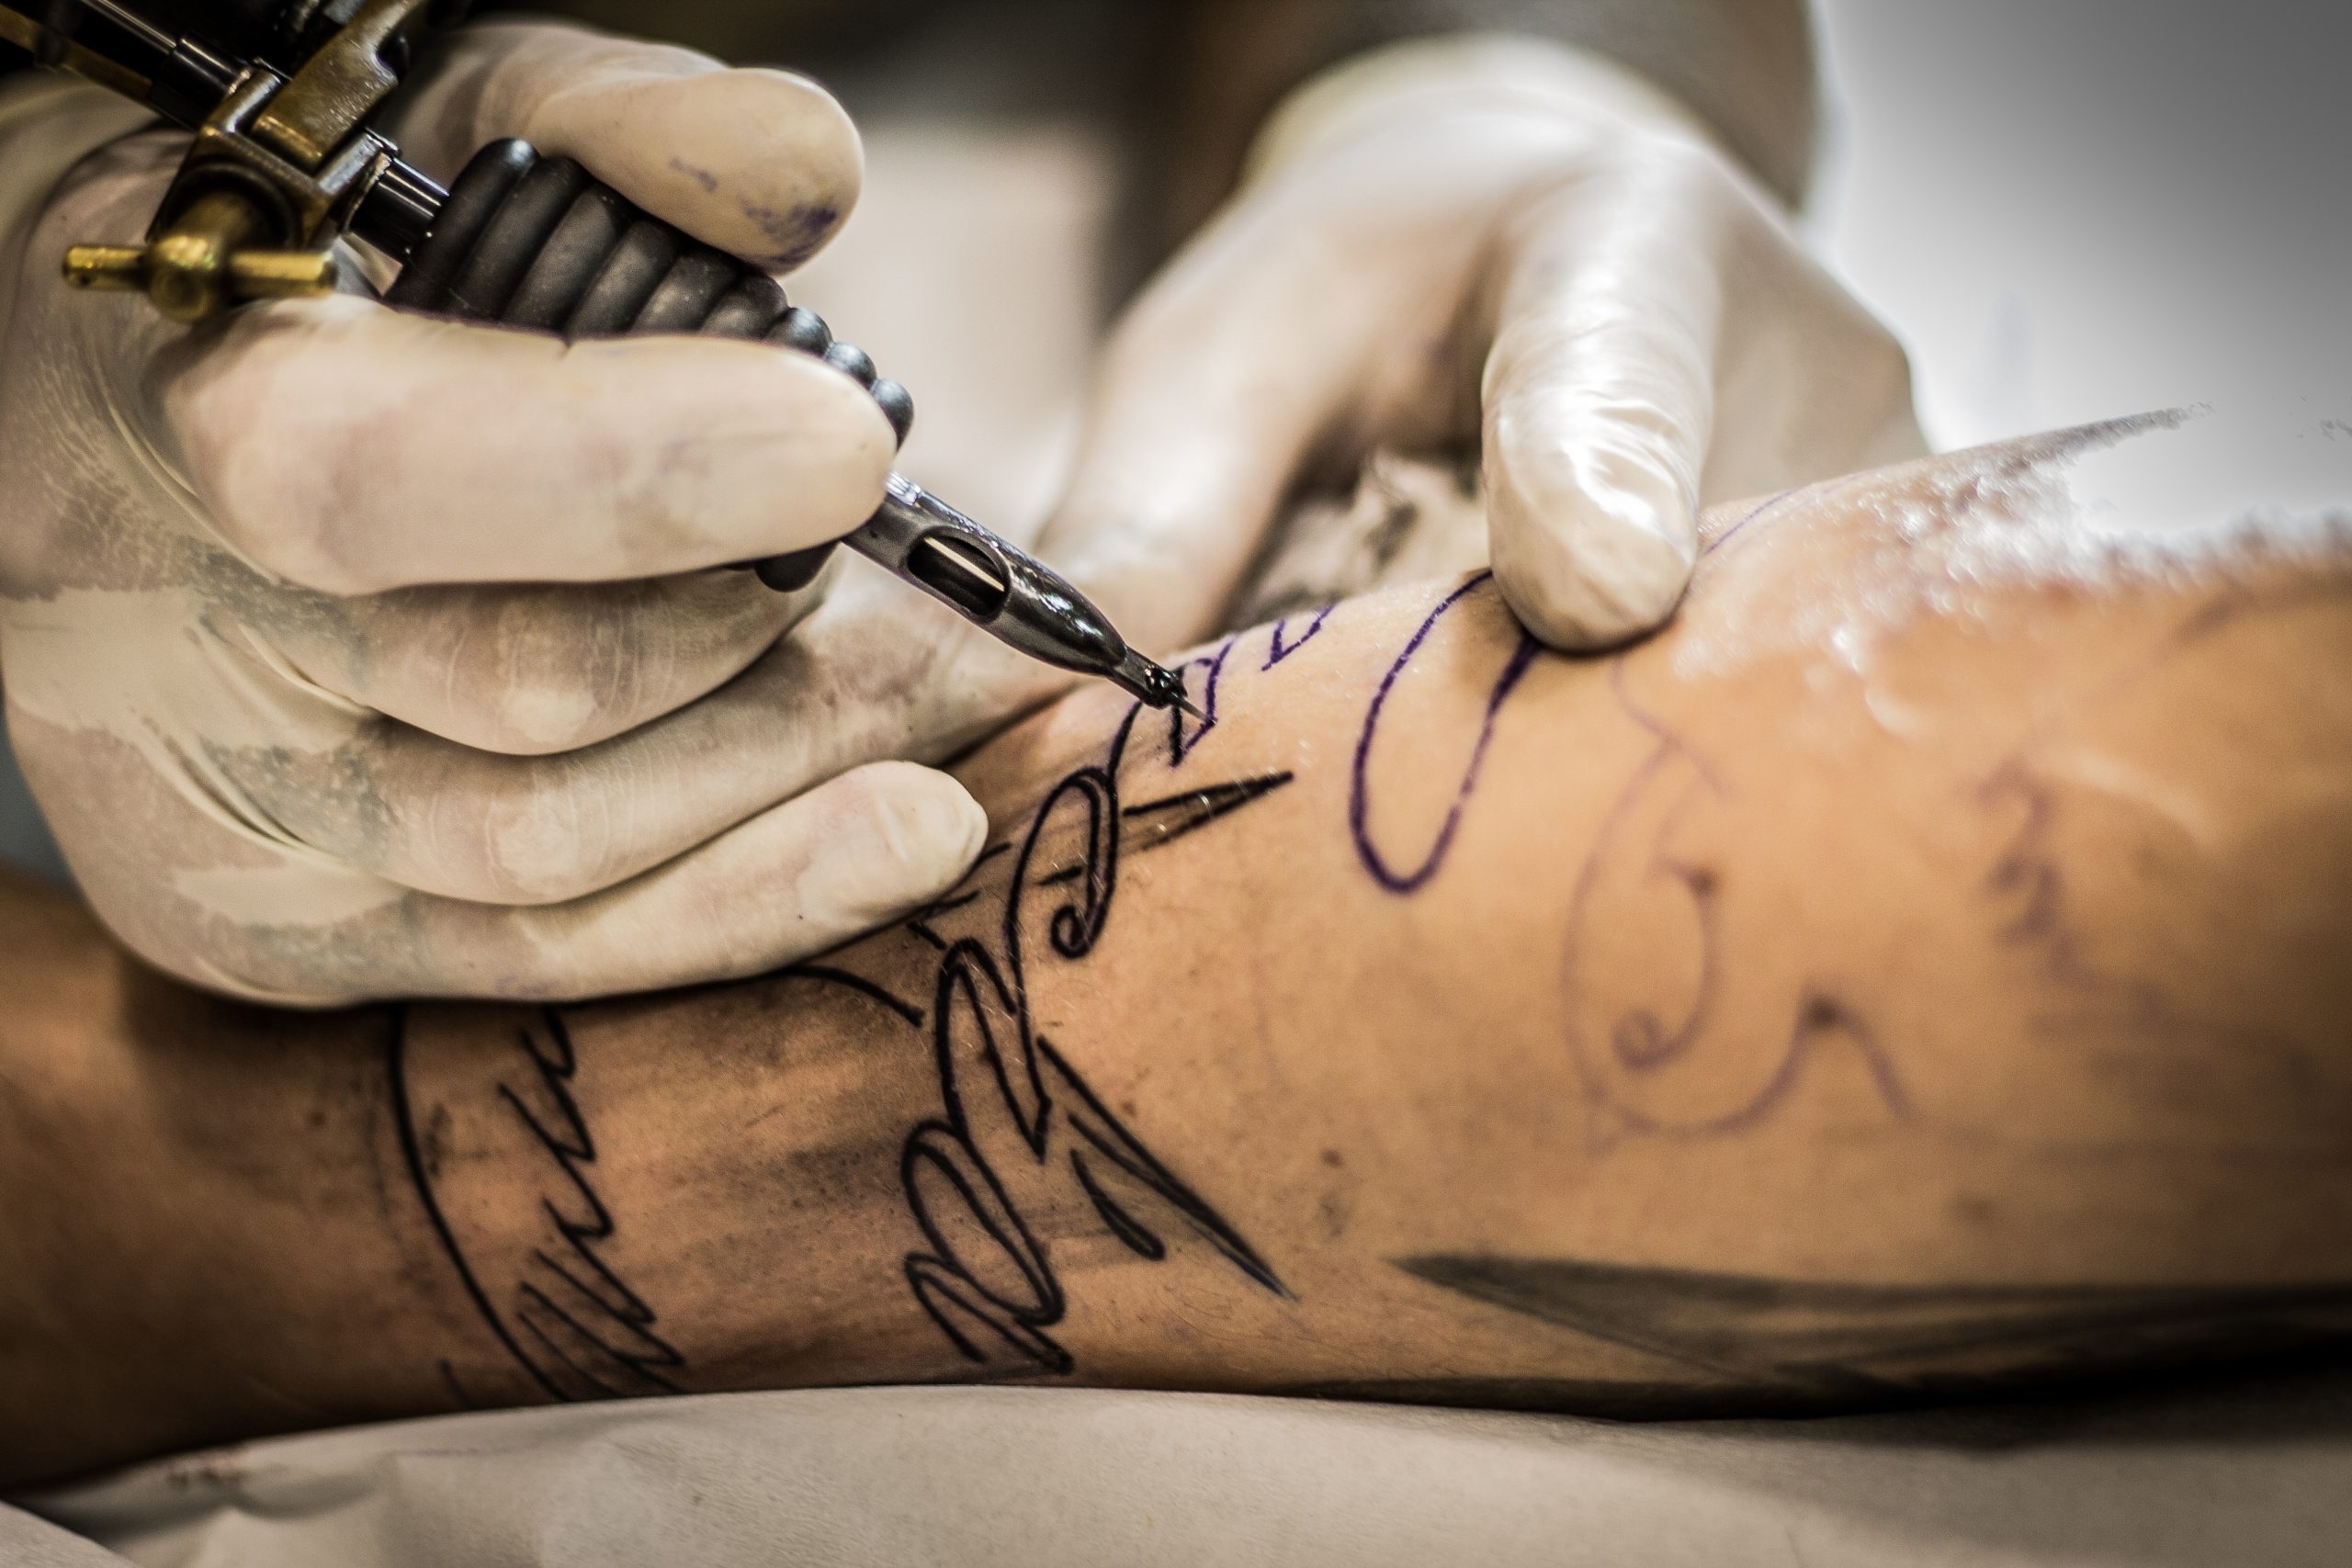 10 Things to Know Before Starting Laser Tattoo Removal - Dr Nathan Holt